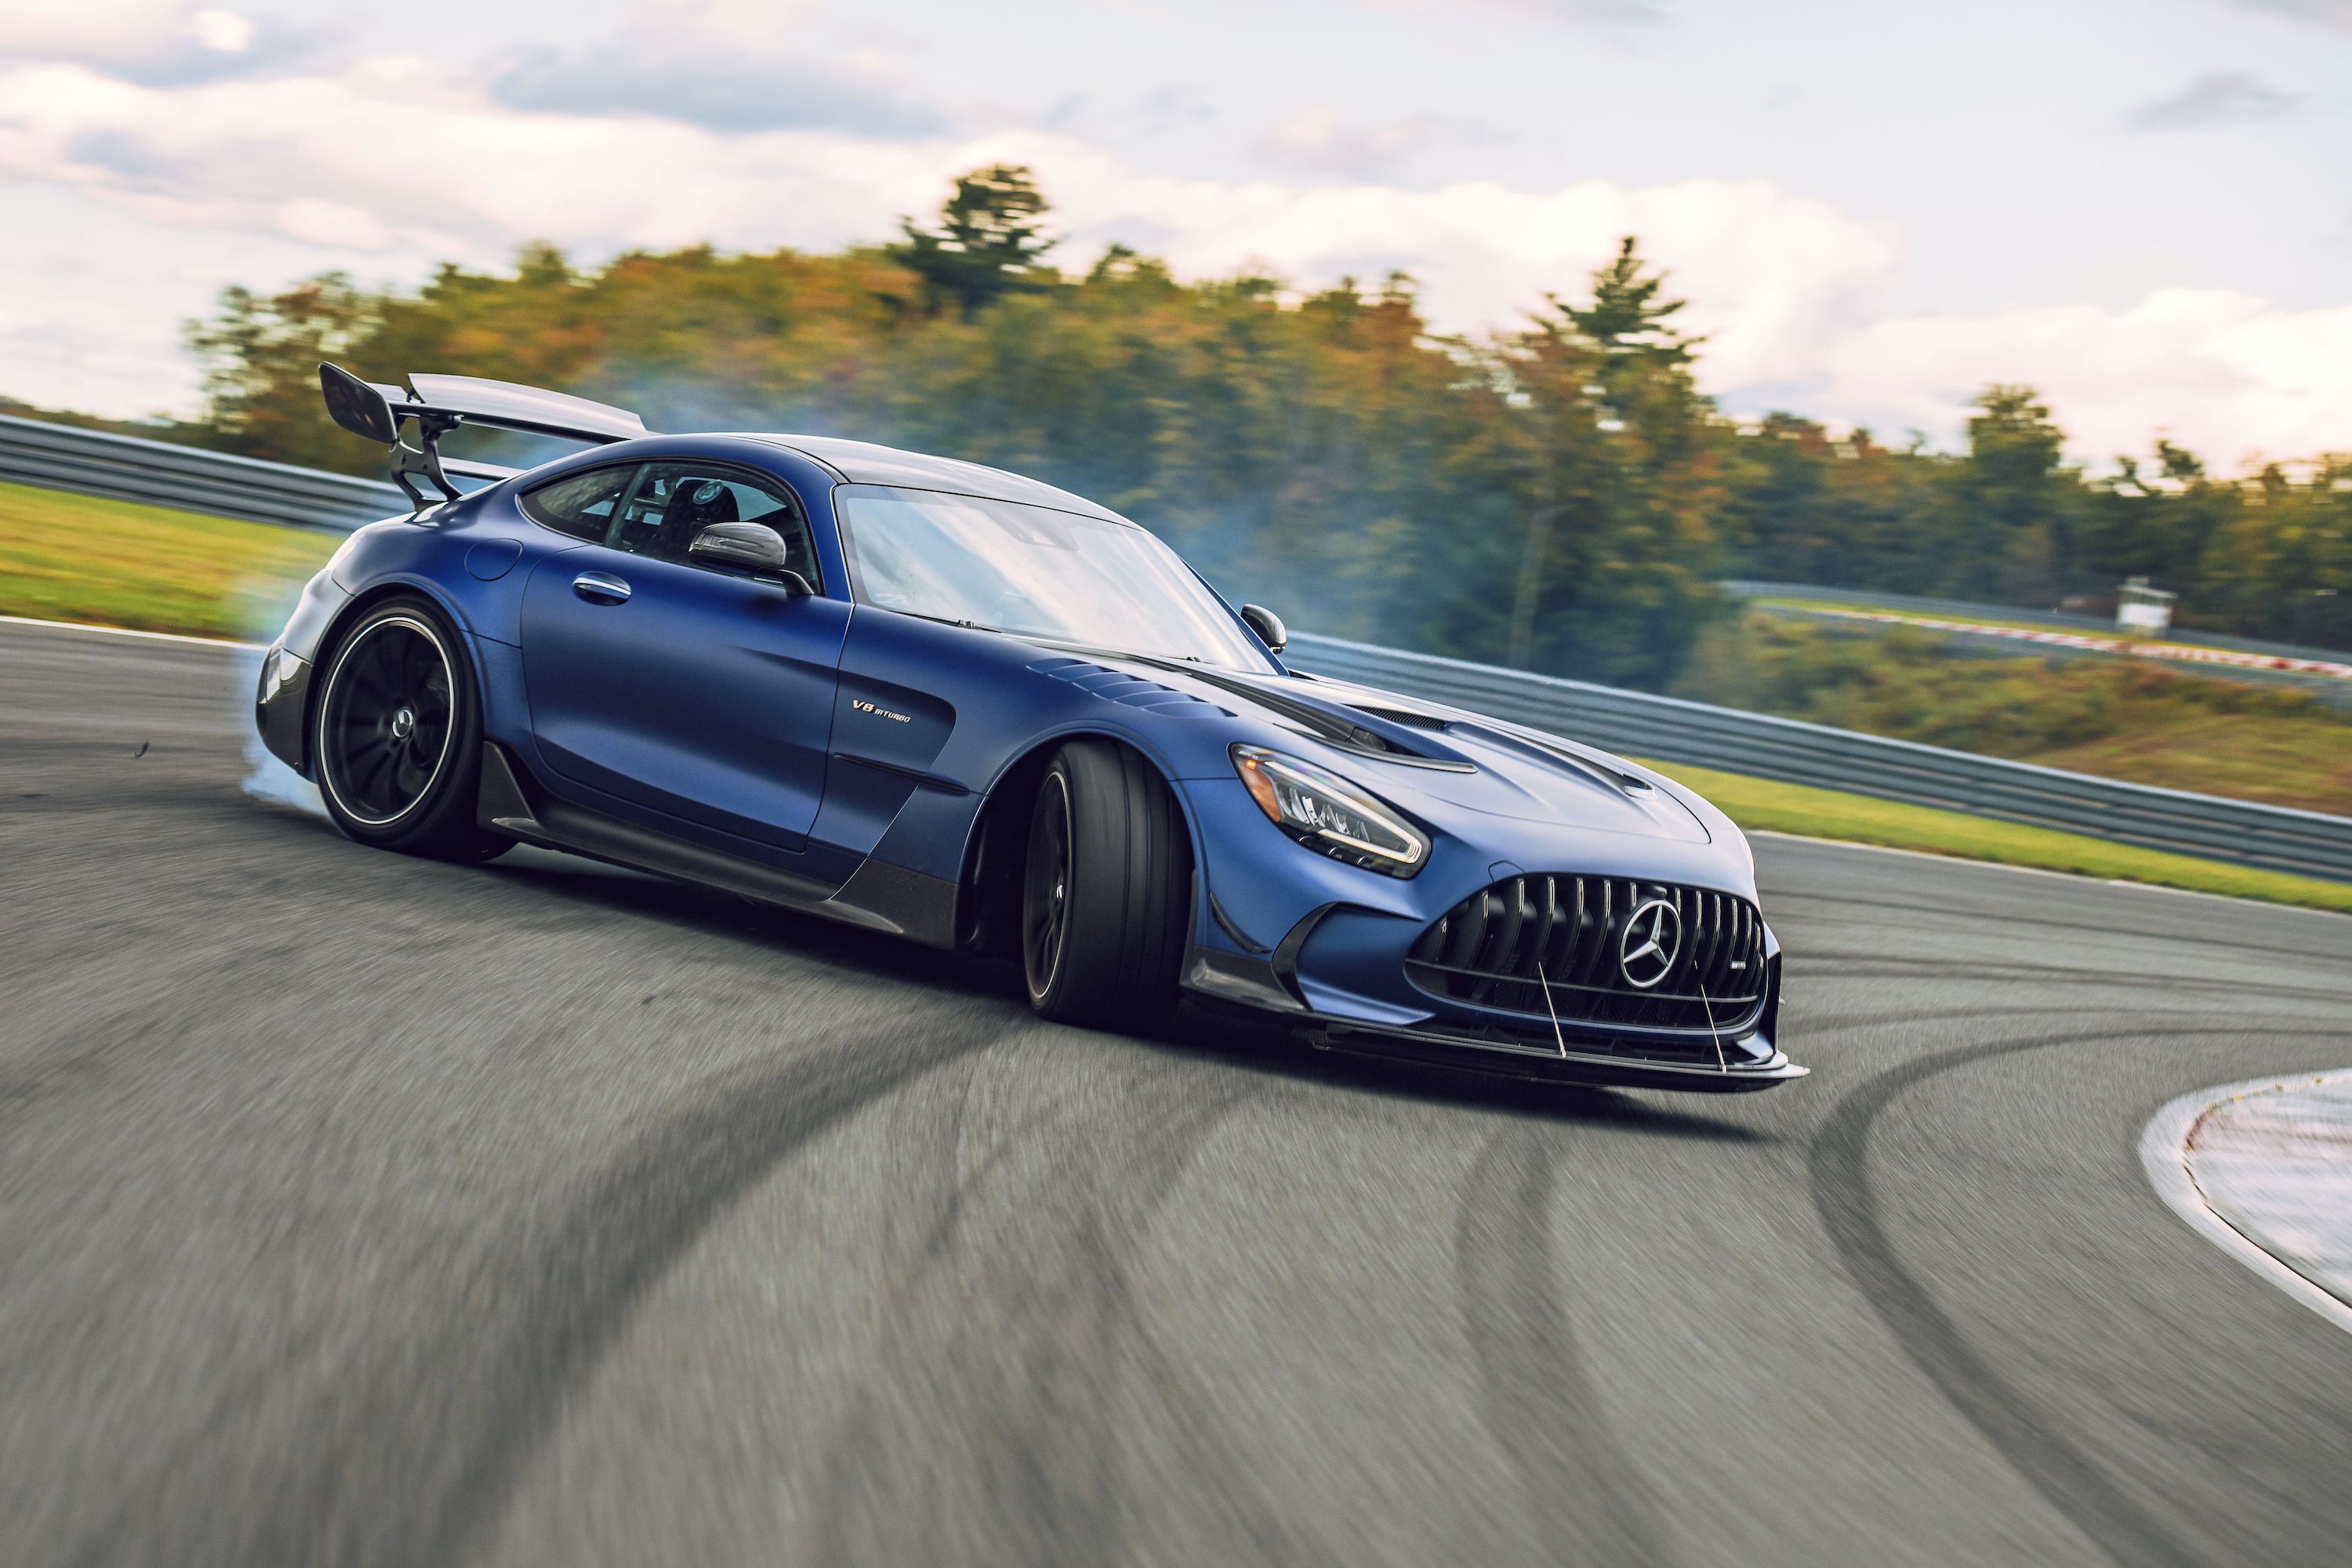 Review: The Mercedes-AMG GT Black Series Is the Finest Yet in the Line –  Robb Report